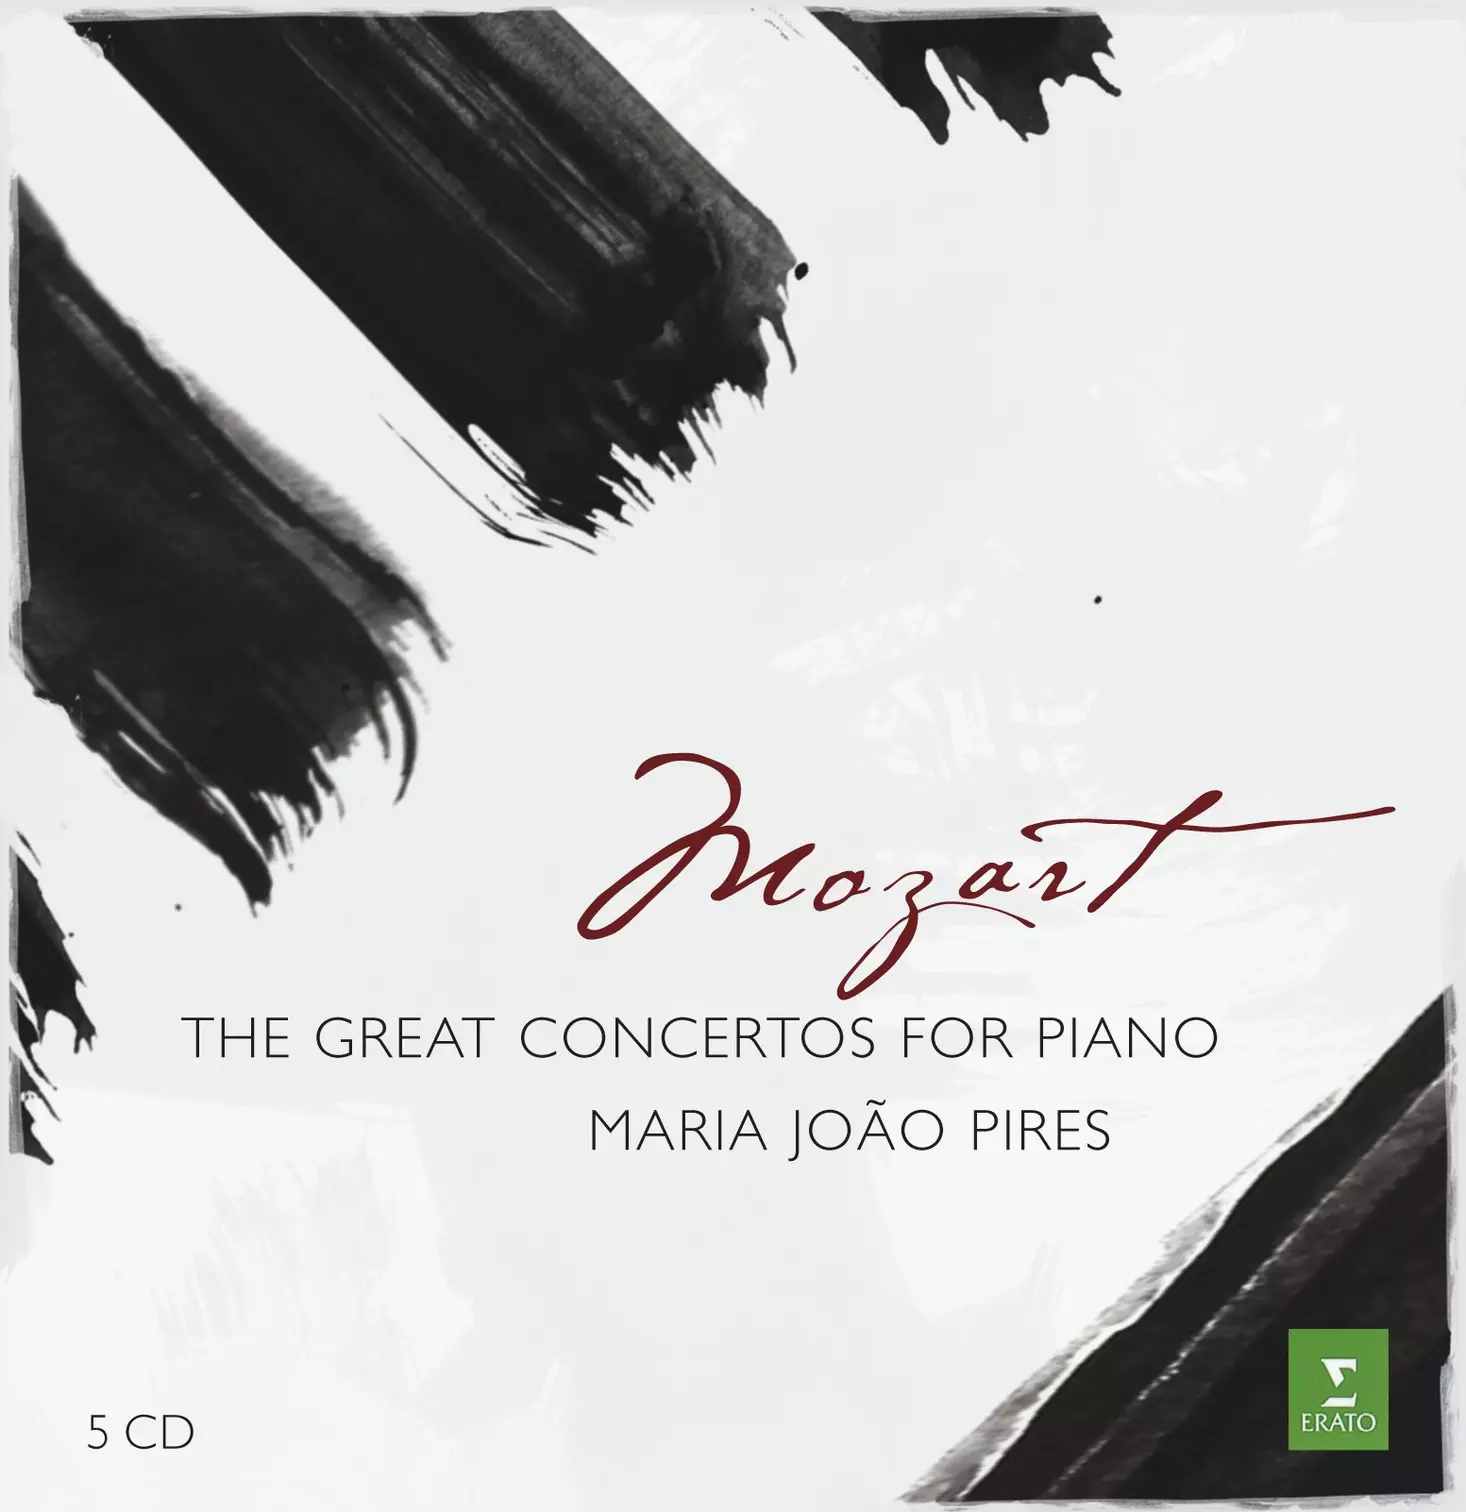 Mozart: The great concertos for piano